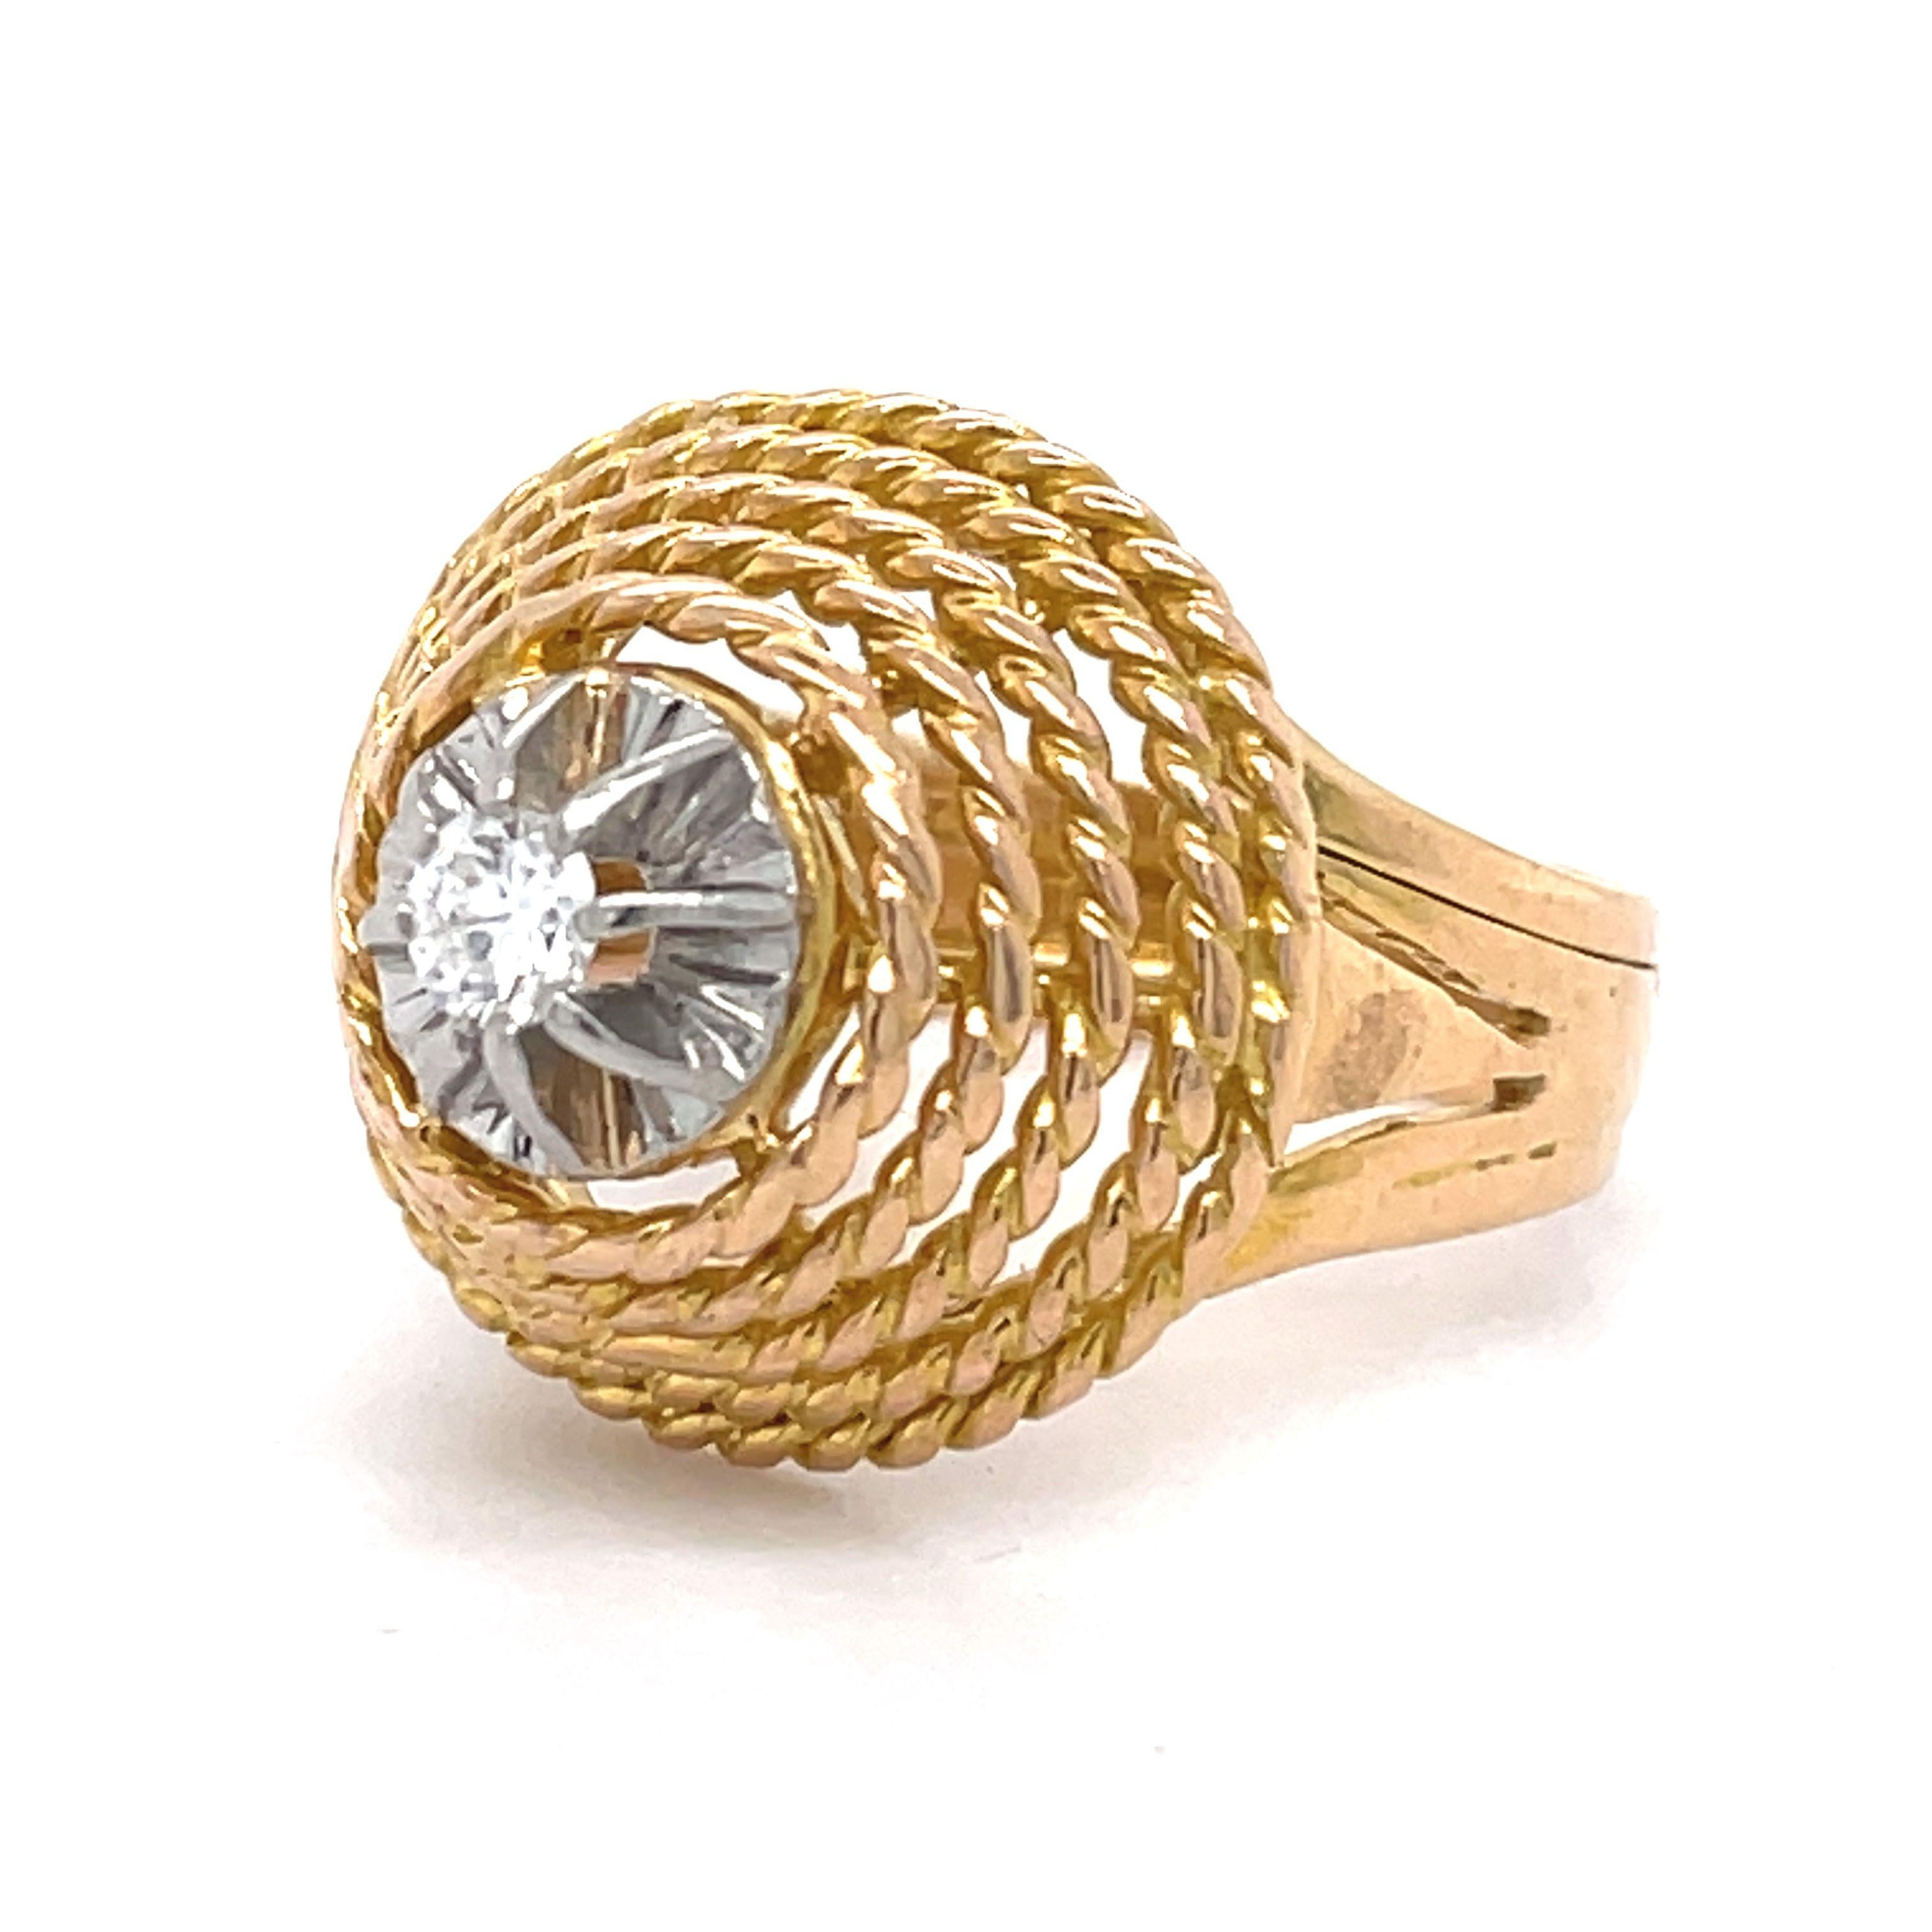 Jewelry Material: Yellow Gold 14k + Platinum (the gold has been tested by a professional)
Total Carat Weight: 0.18ct (Approx.)
Total Metal Weight: 8.21g
Size: 7.25 US \ EU 55 \ Diameter 17.75mm (inner diameter)

Grading Results:
Stone Type: